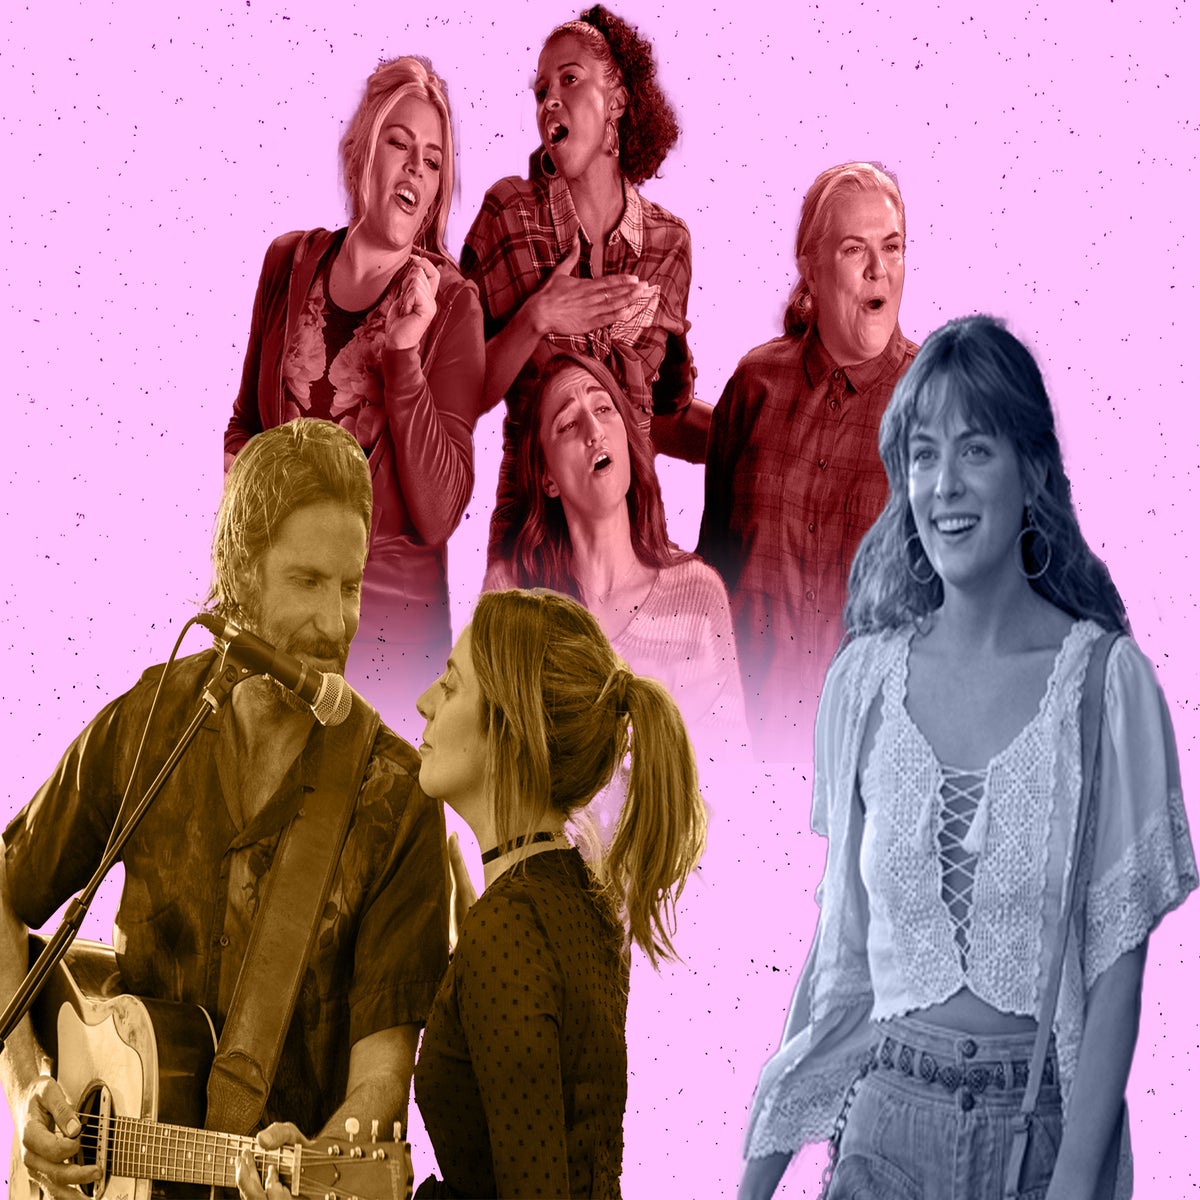 From Daisy Jones and The Six to Girls5eva: How do you write music